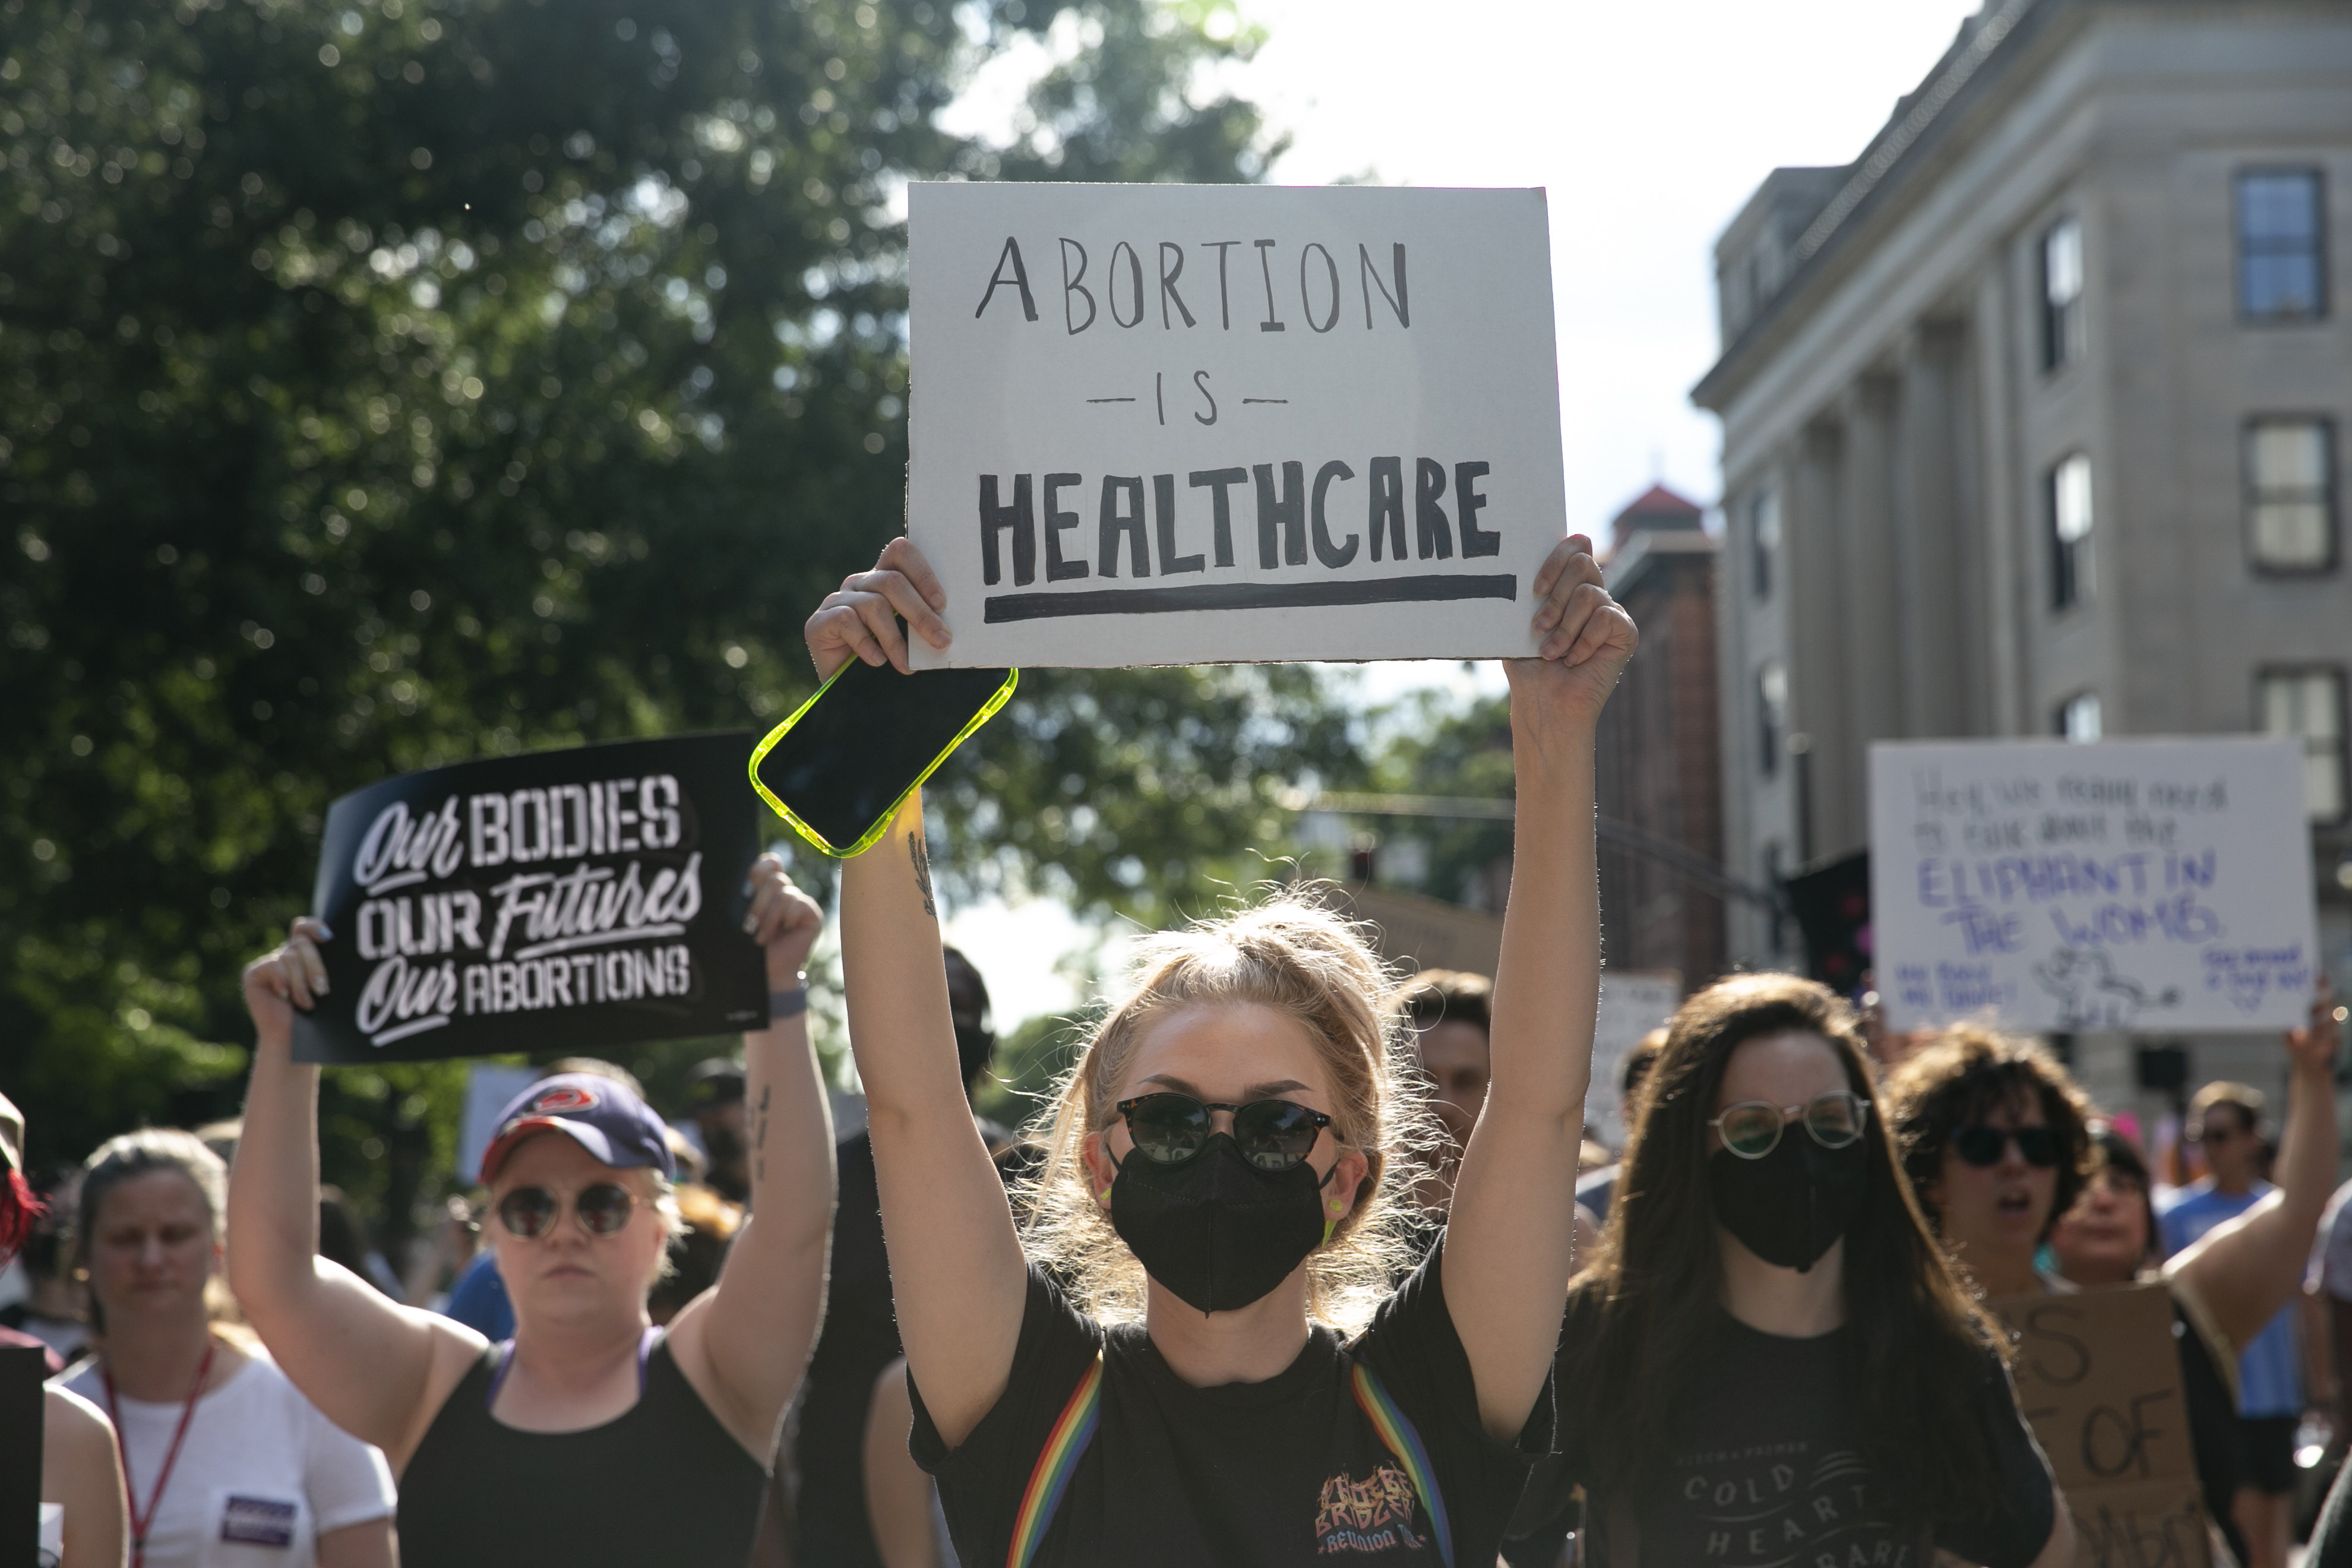 A protester in a crowd holds up a sign that reads “Abortion is healthcare.”